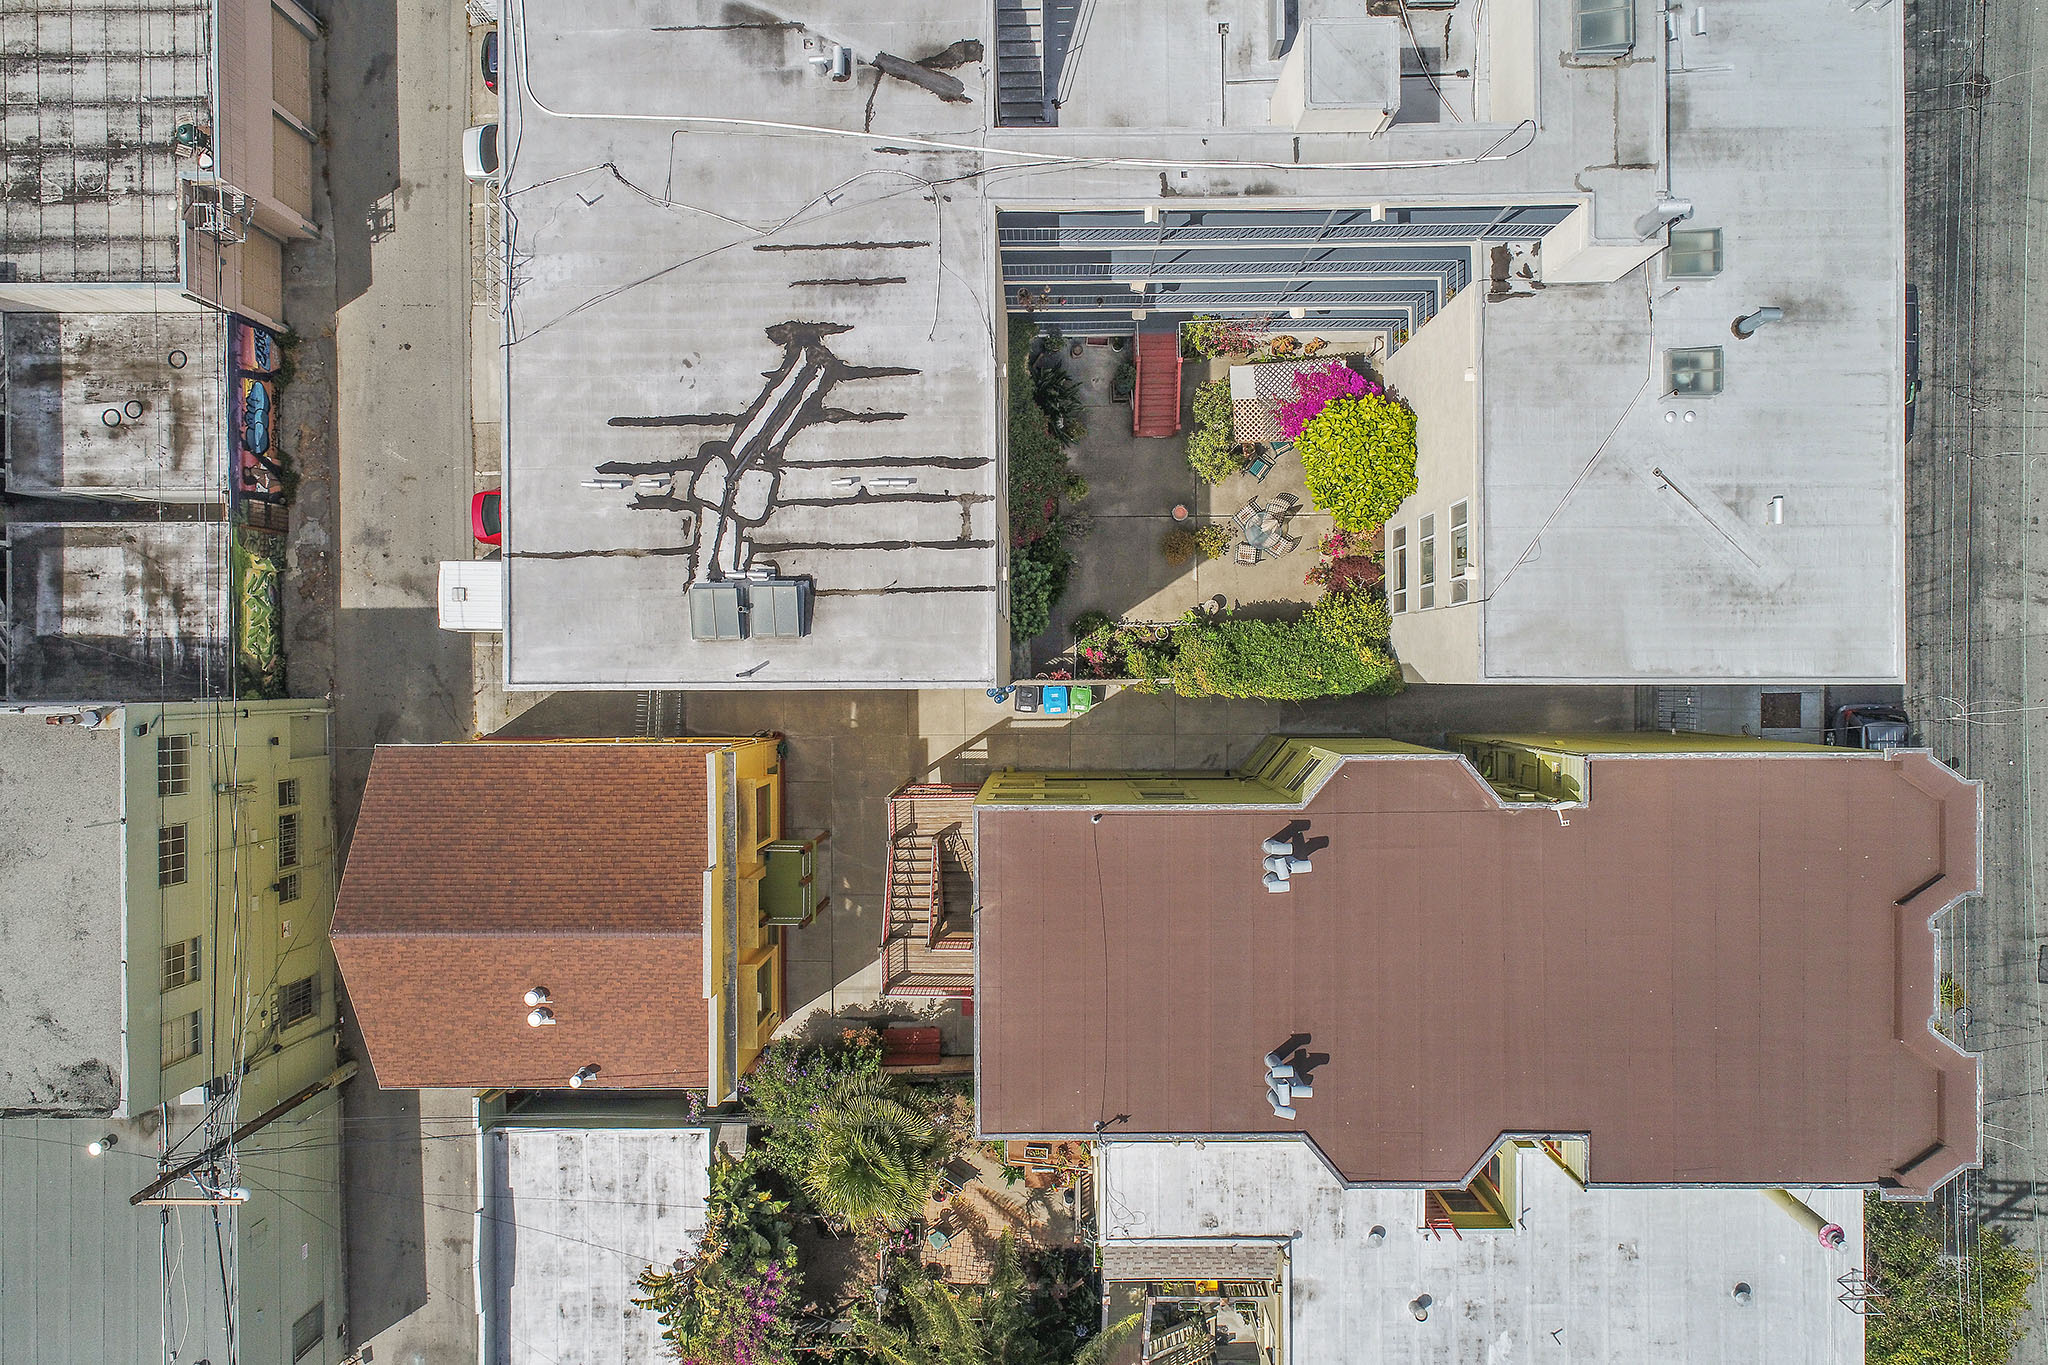 Property Photo: Aerial view looking down at 464-468 Bartlett Street, showing a larger property to the right, and a smaller stand-along property to the left